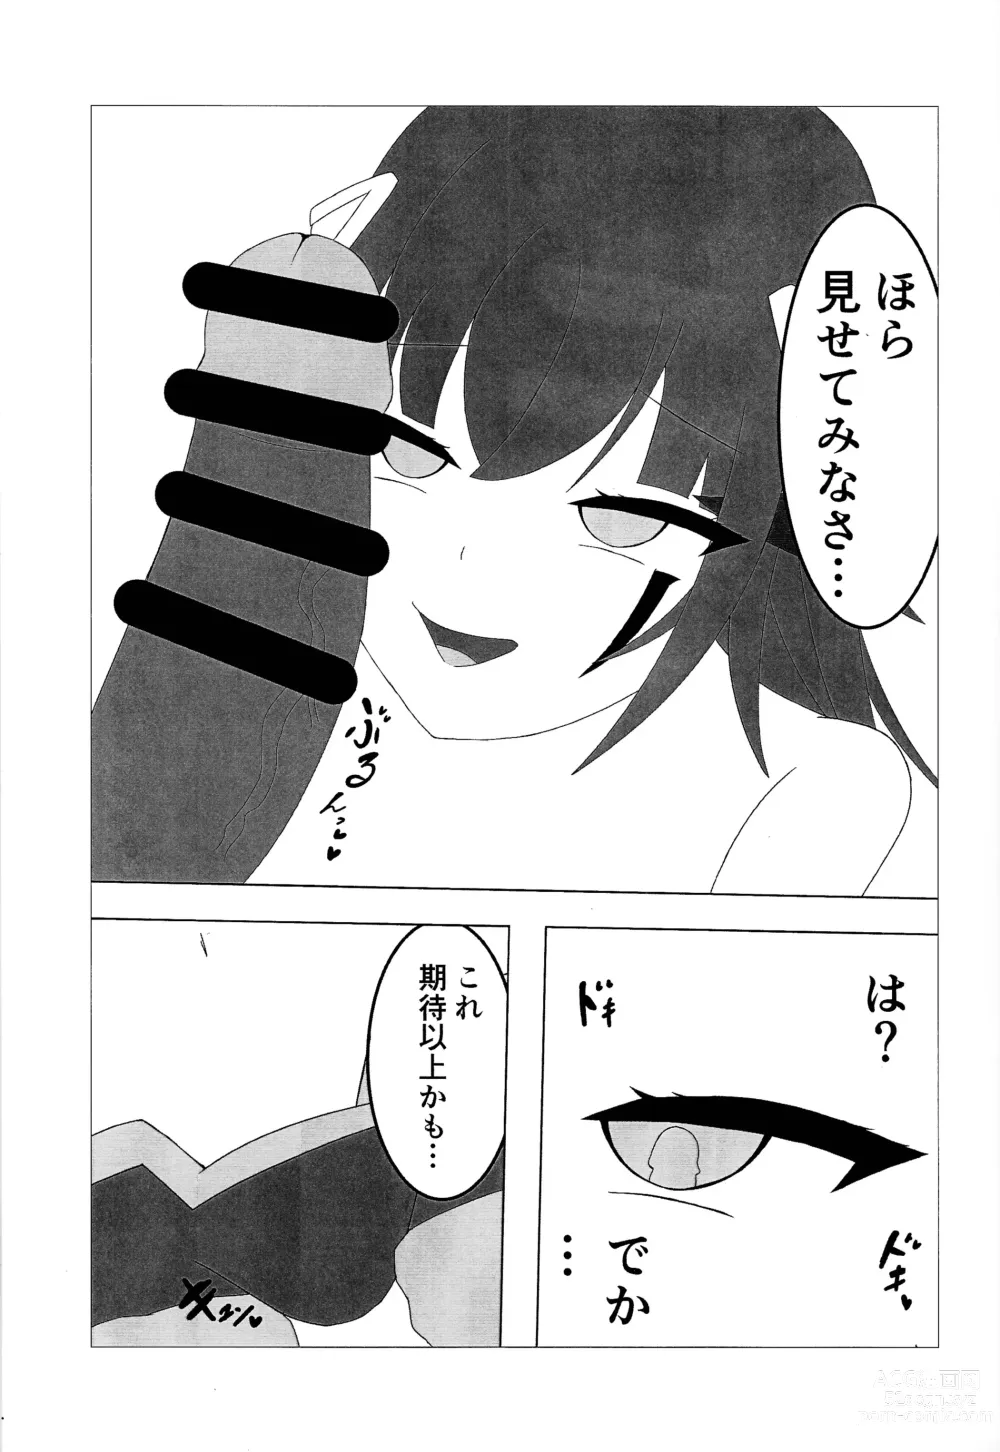 Page 8 of doujinshi FLAMES OF THIS AFFECTION